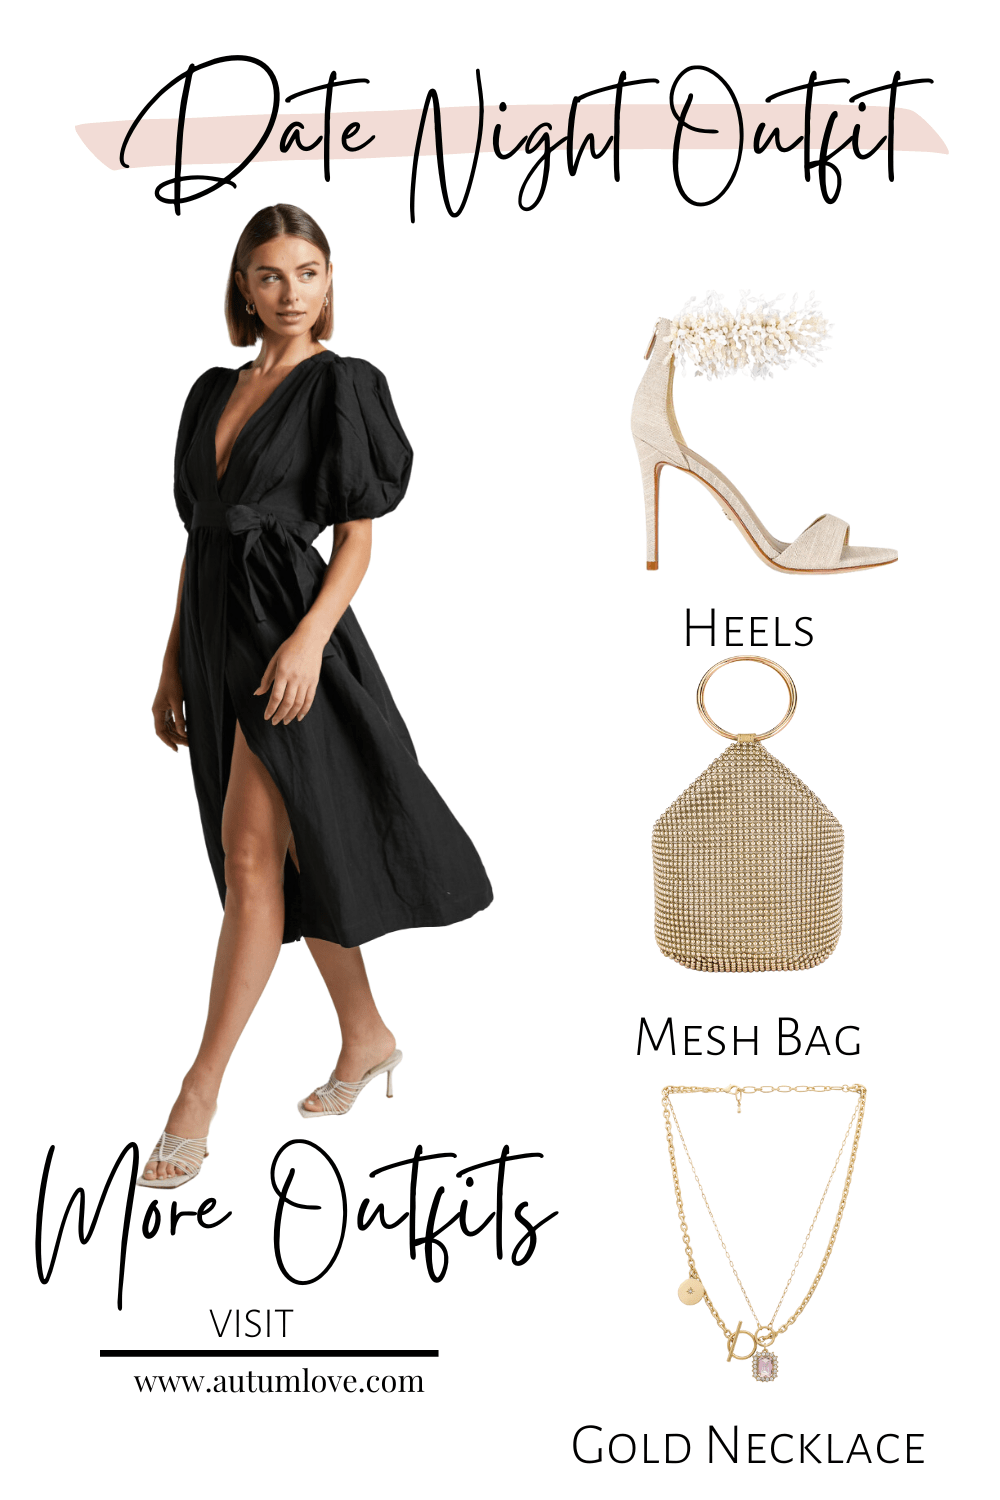 Dress to Impress: Stylish & Romantic Date Night Outfit Ideas for